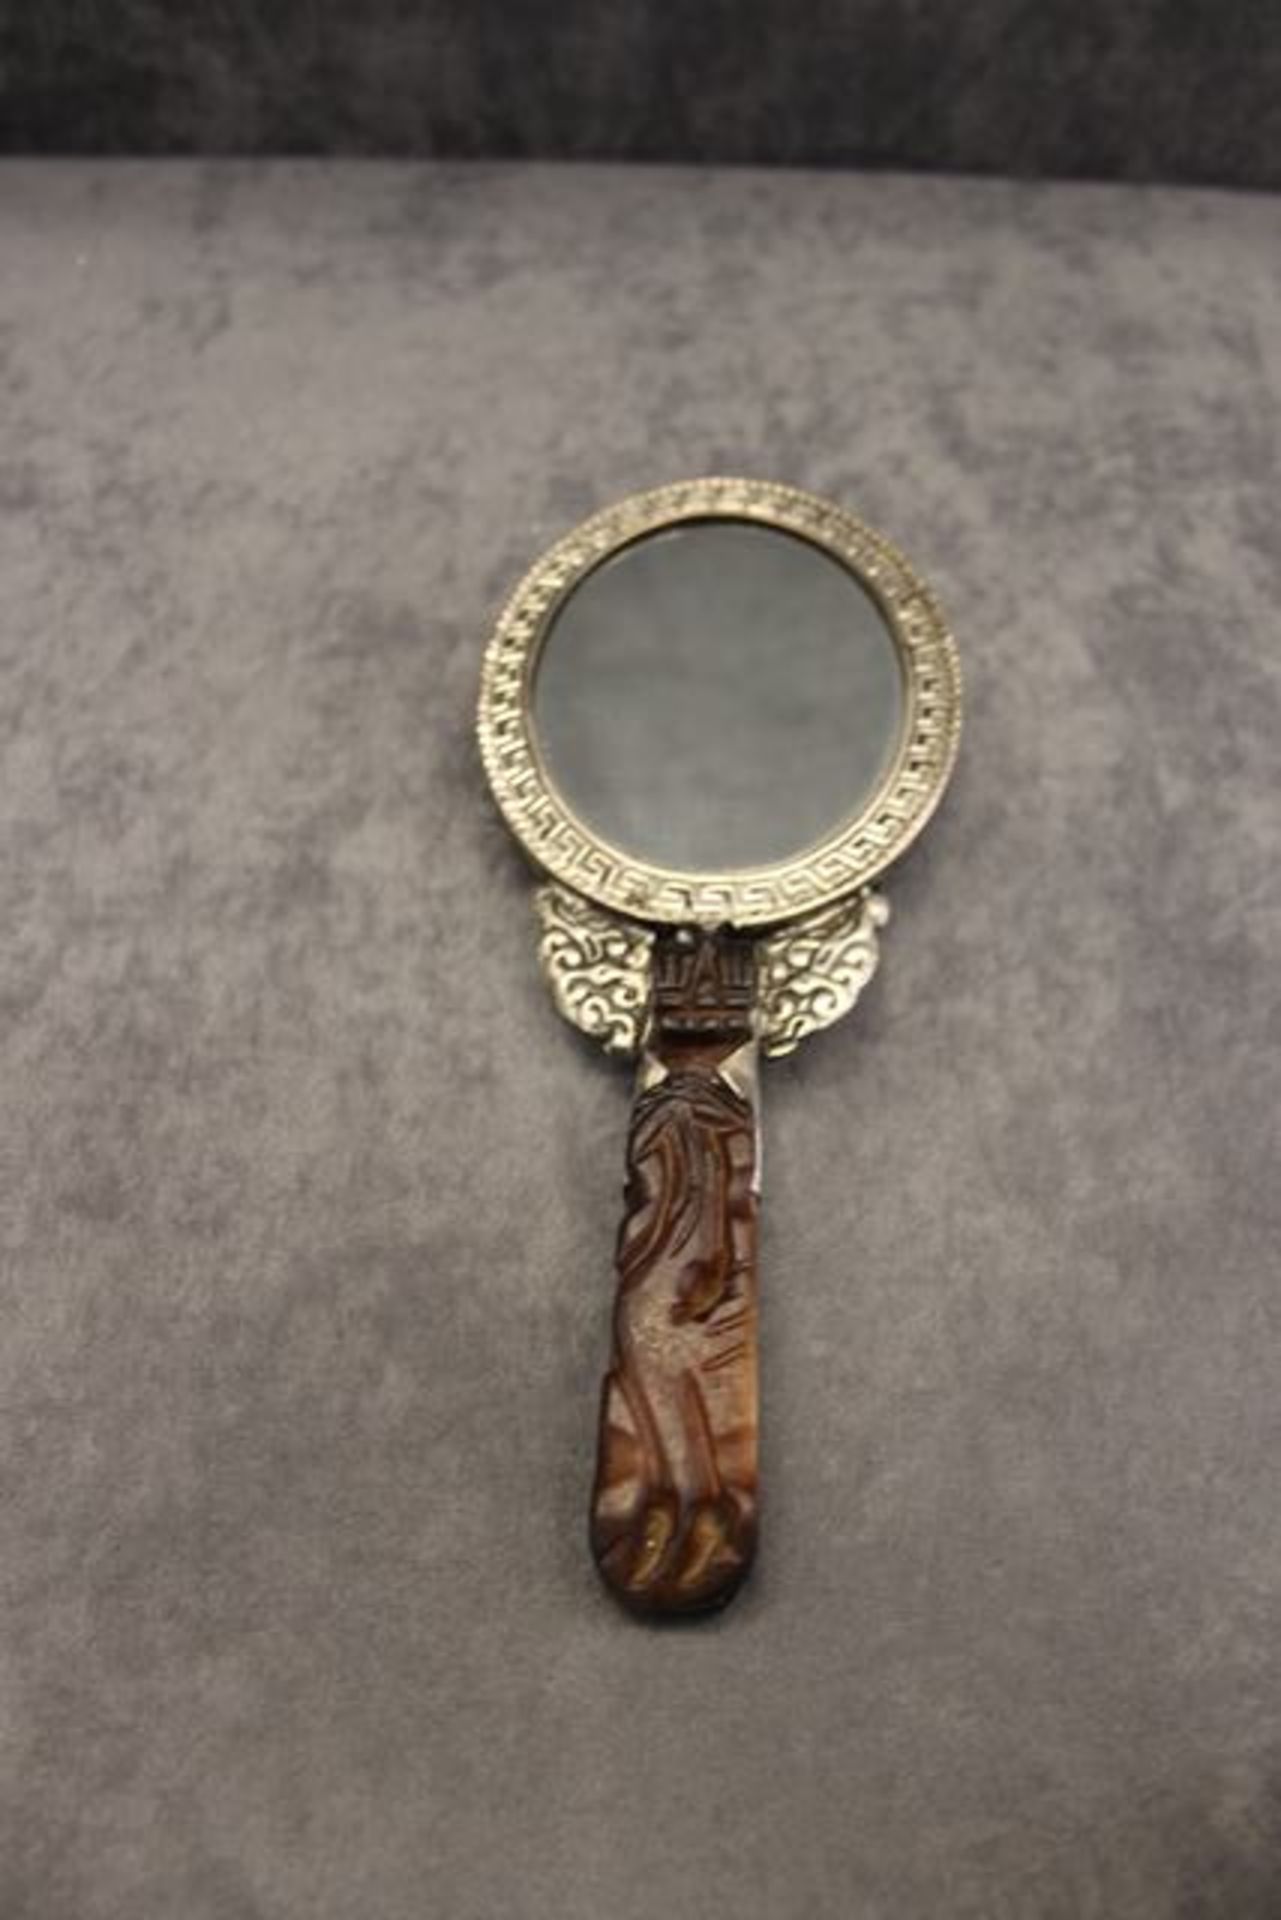 Bead inlay lady’s hand mirror decorated with white copper and Tibetan silver highly decorative - Image 4 of 4